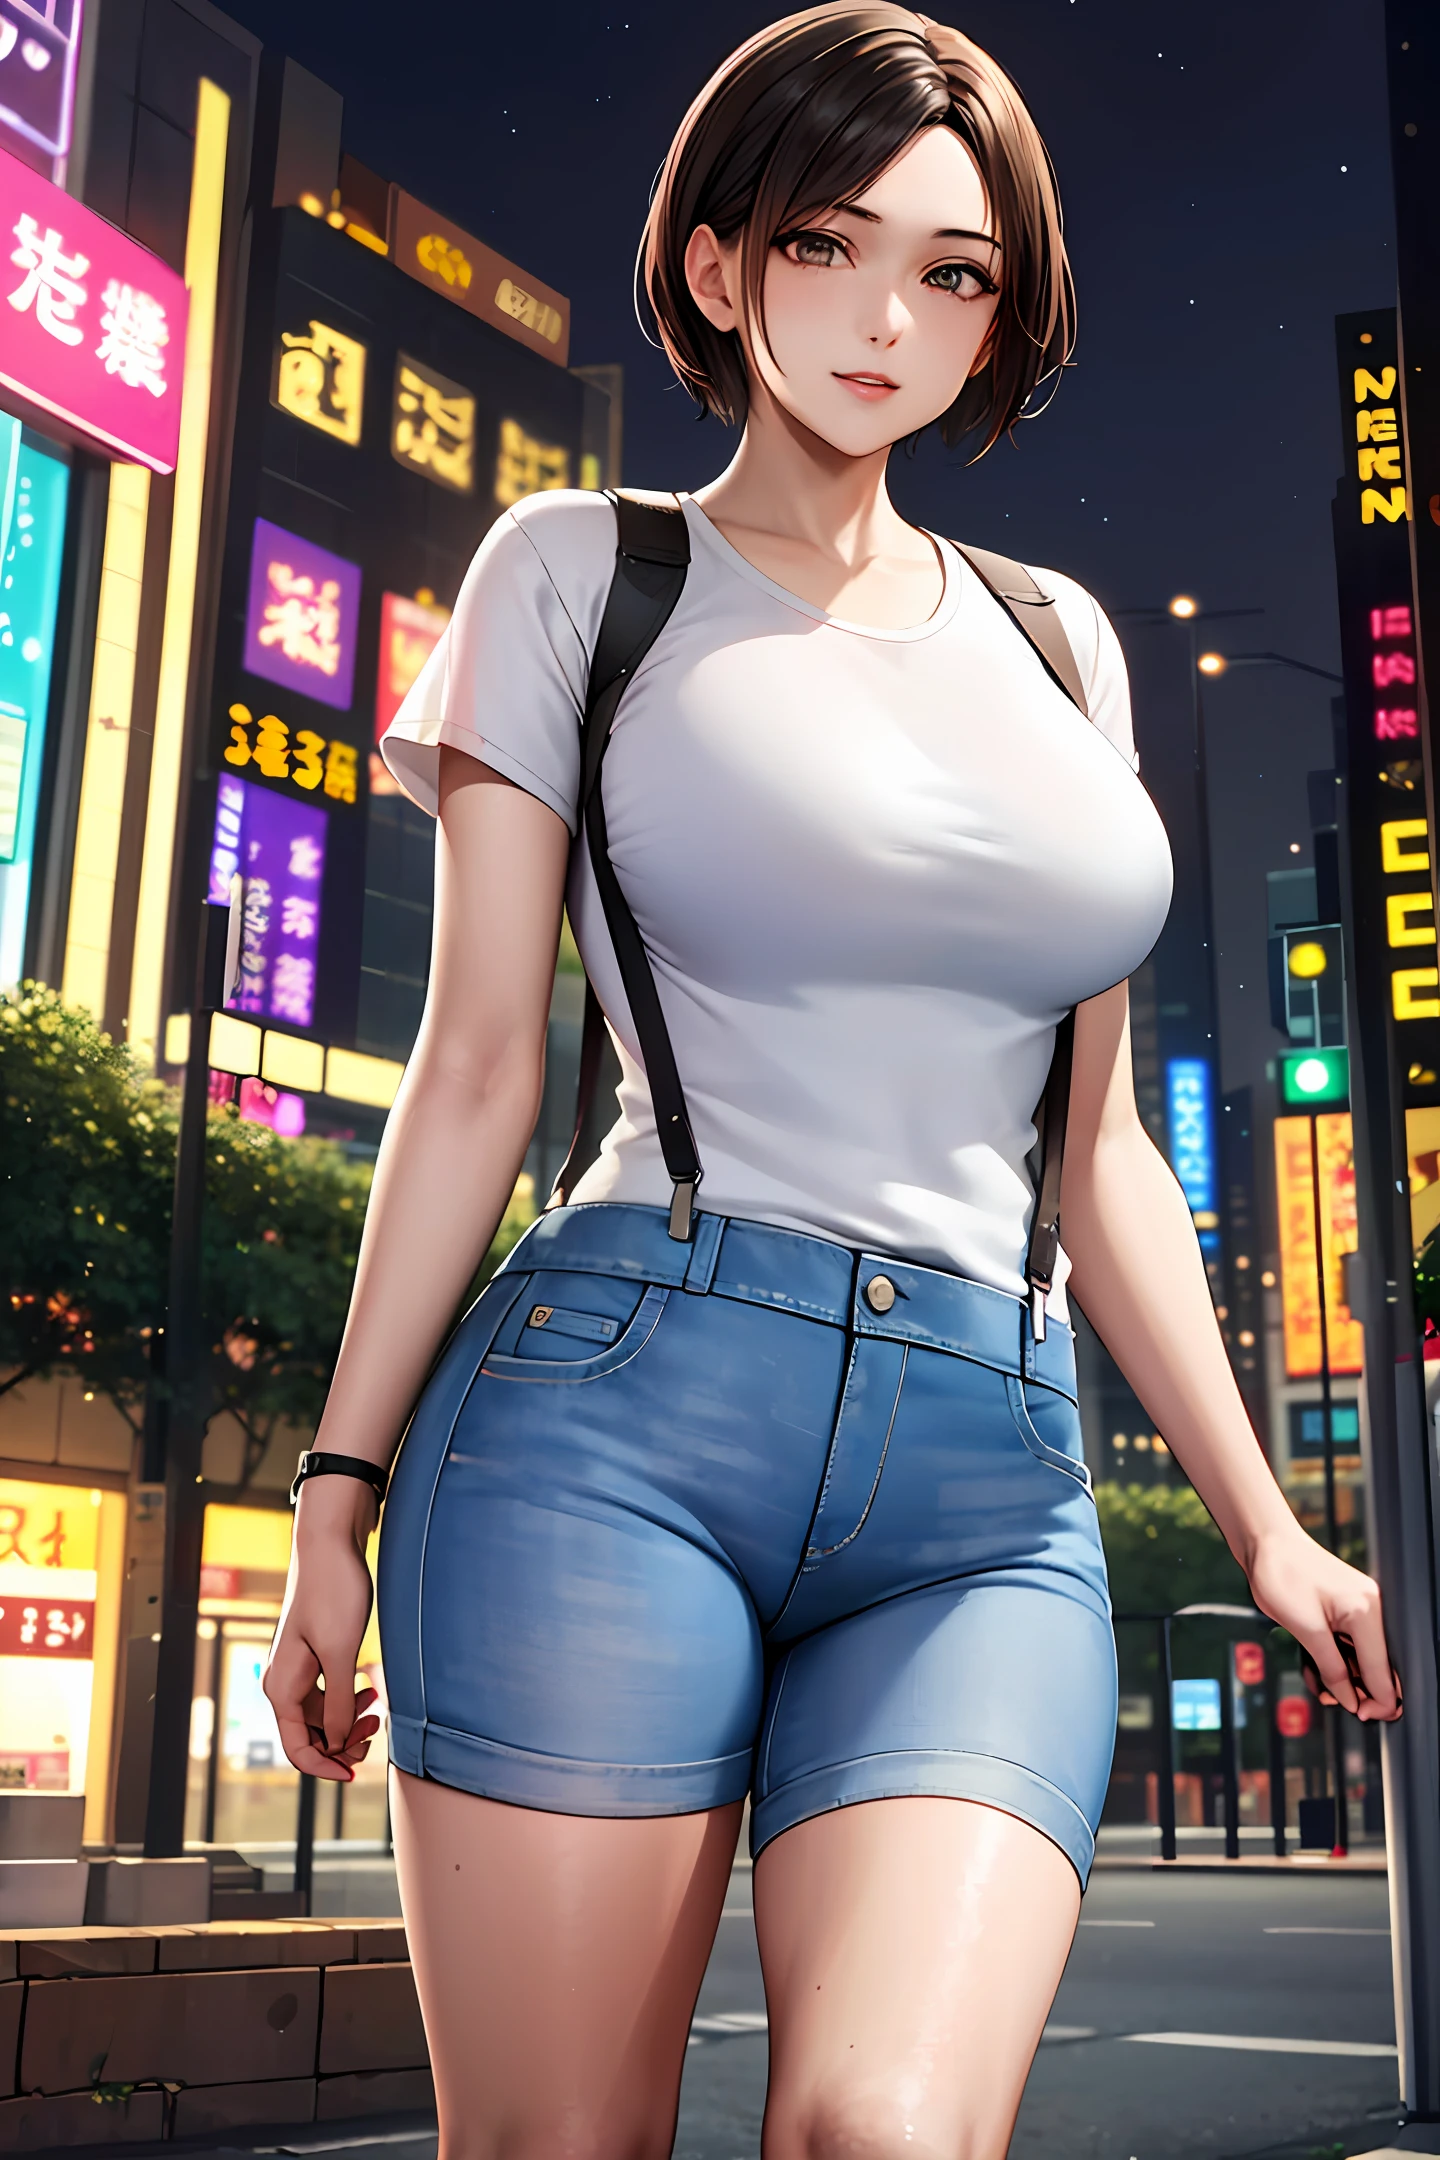 8k, , Whole human body, Long legs, Focalors:1.2, perfect figure beautiful woman:1.4, Slim abs:1.1, ( large tits:1.2 )), (white tight t-shirt, Denim suspenders, to stand:1.2), ((city night scene, Highly detailed facial and skin texture, detailed eye, Double eyelids